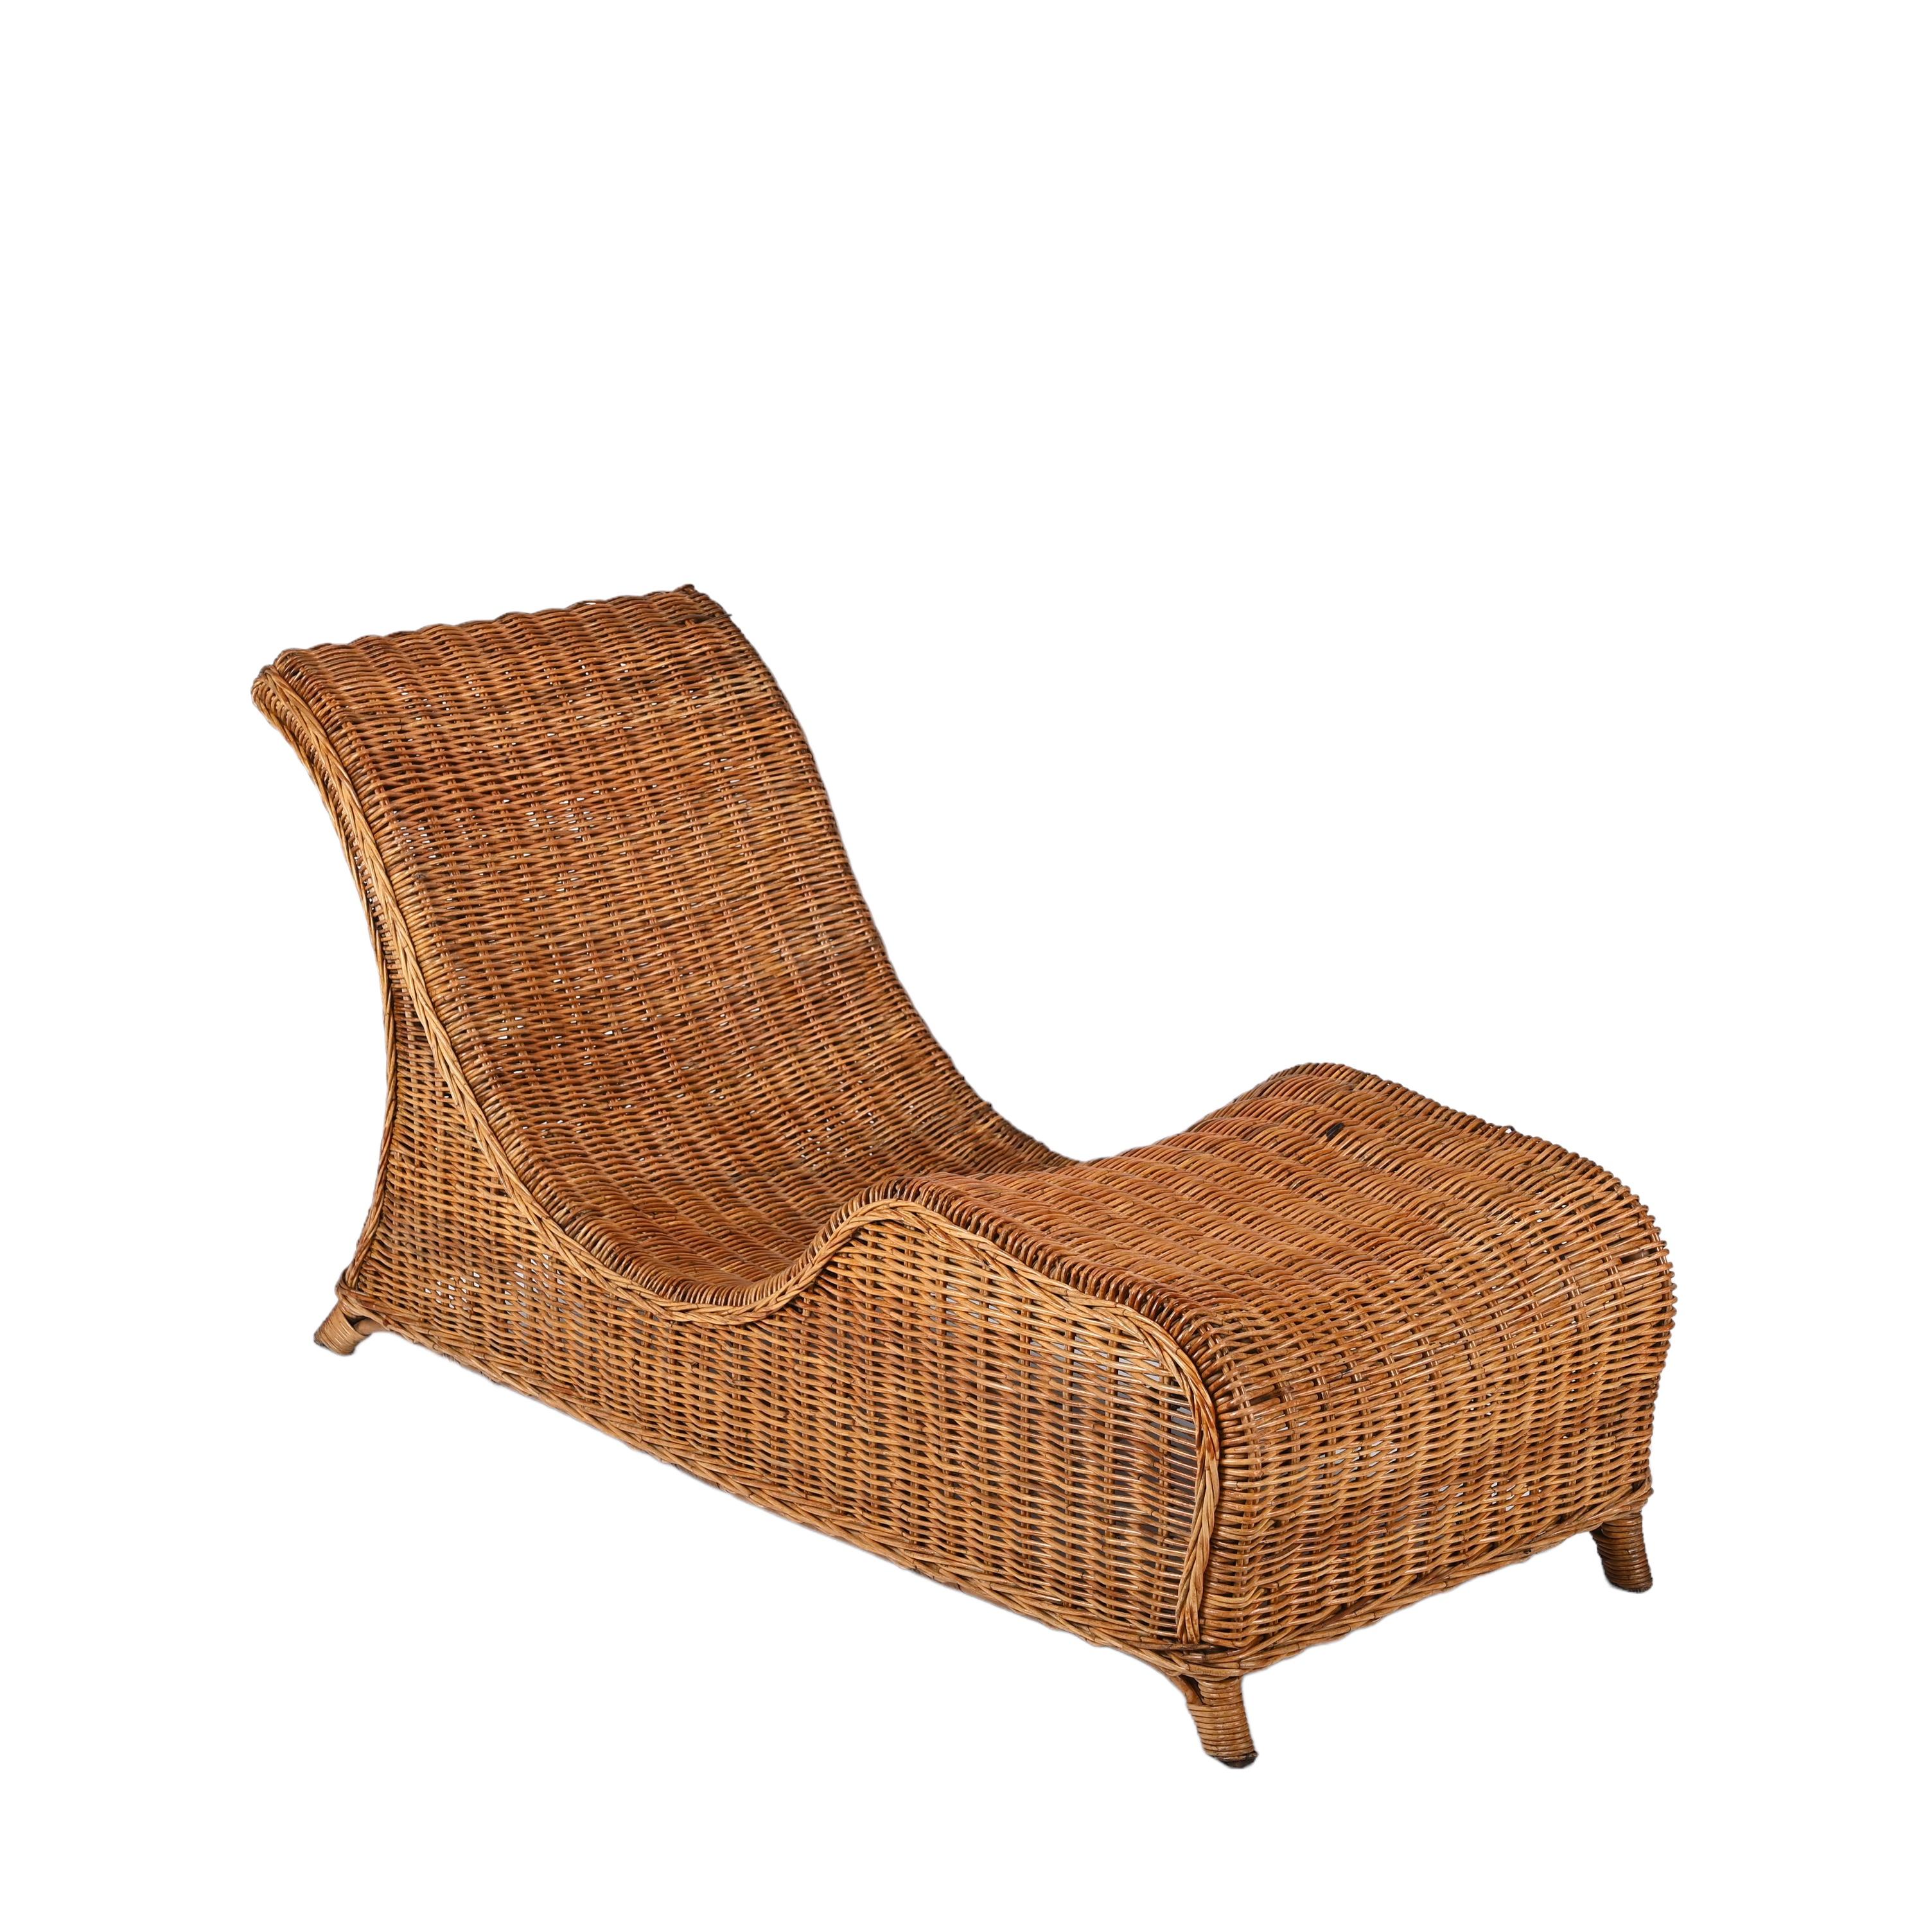 Amazing midcentury modern bamboo and wicker chaise lounge. This fantastic piece was designed in Italy during the 1960s .

This piece is incredible as the materials are wonderfully merged with curved and sinuous lines. Regardless of the toughness of